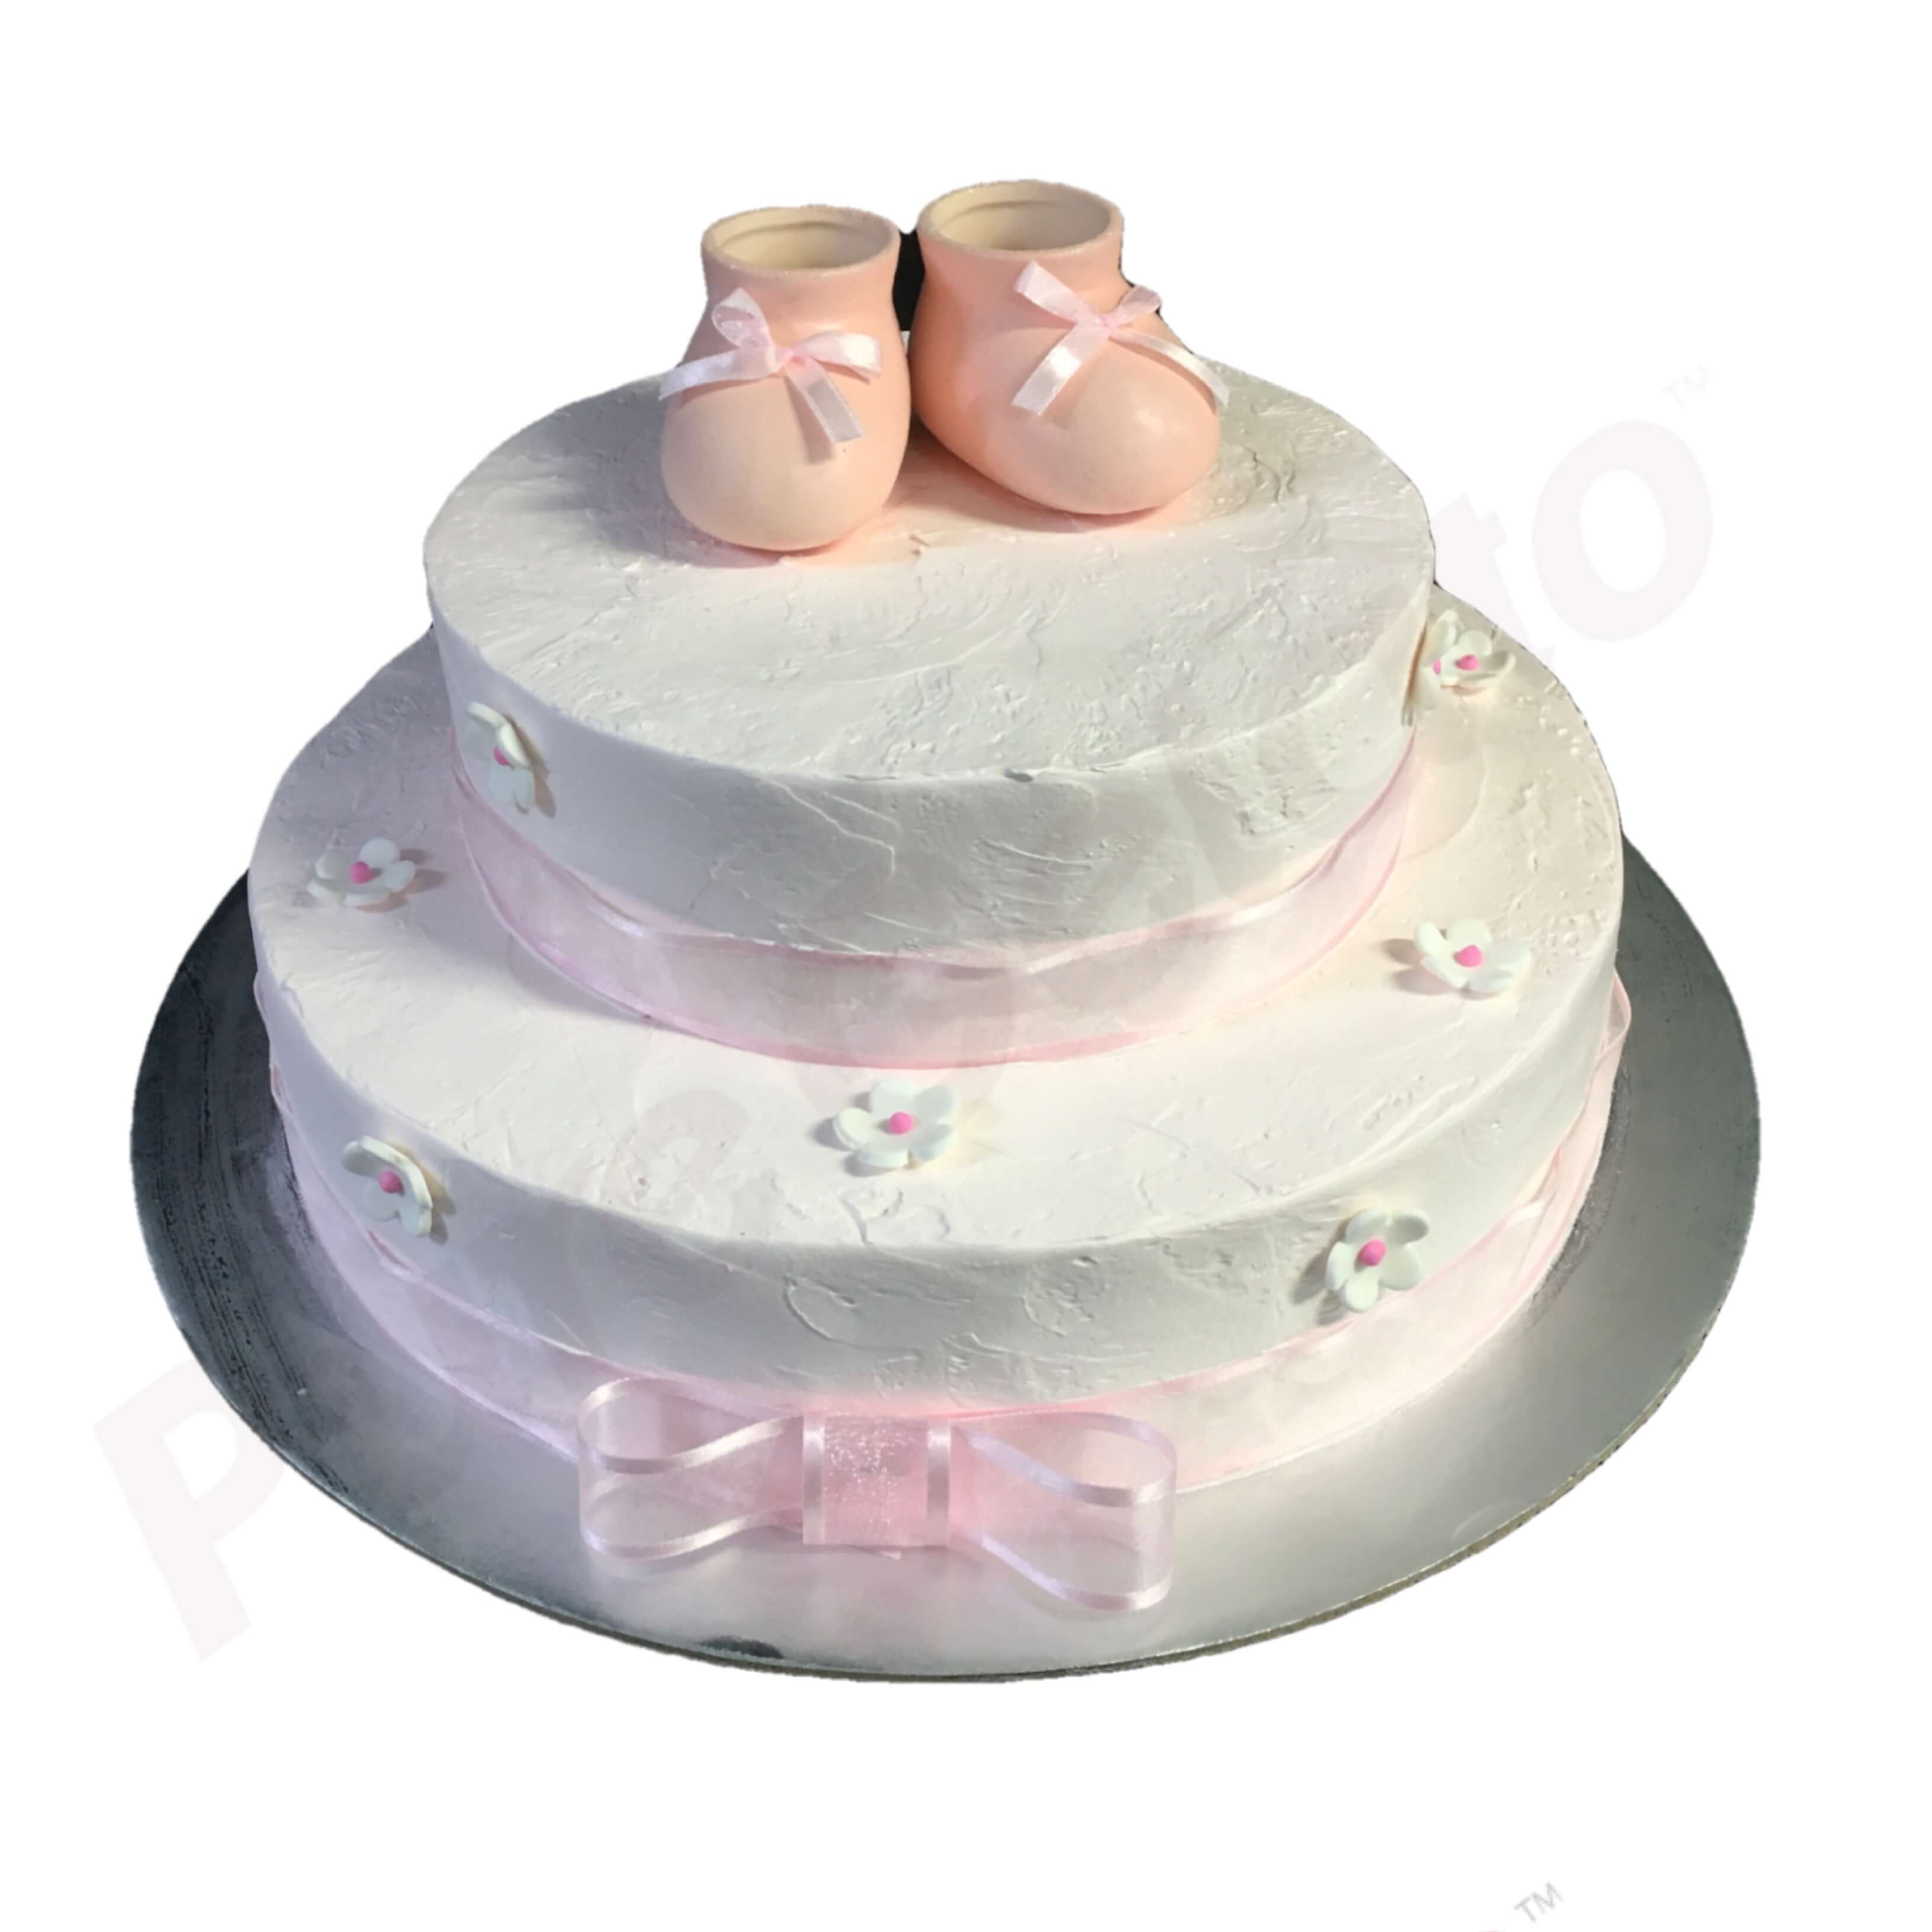 Baby and Christening Cakes